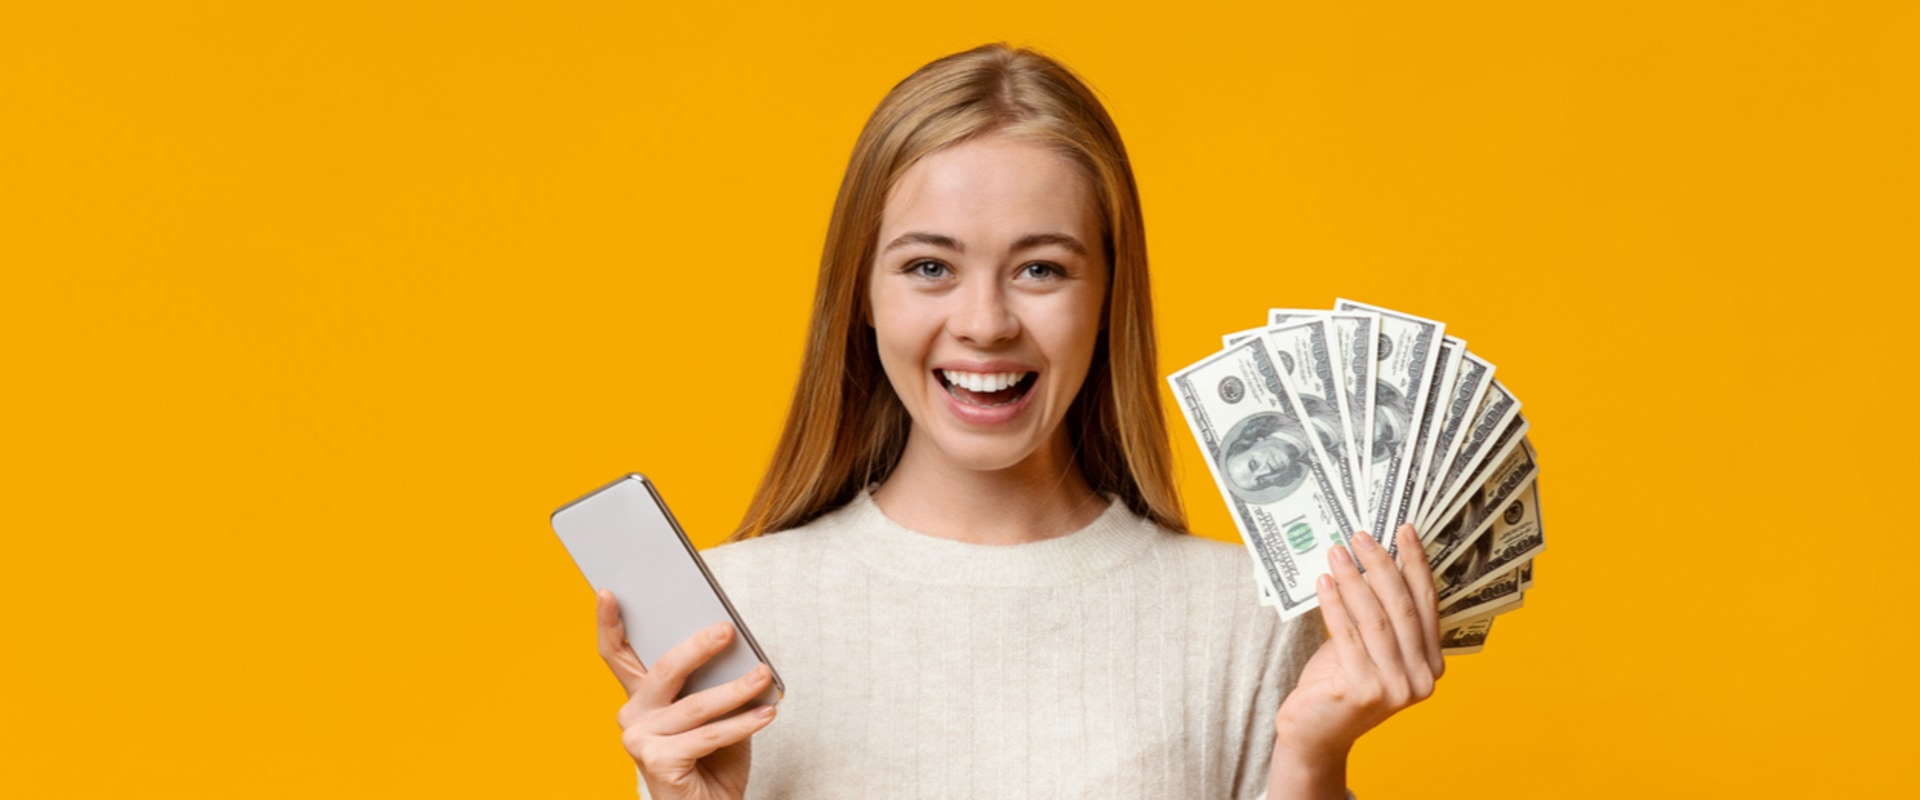 Faster Cash Advances and Payday Loans: Get Funded Quickly